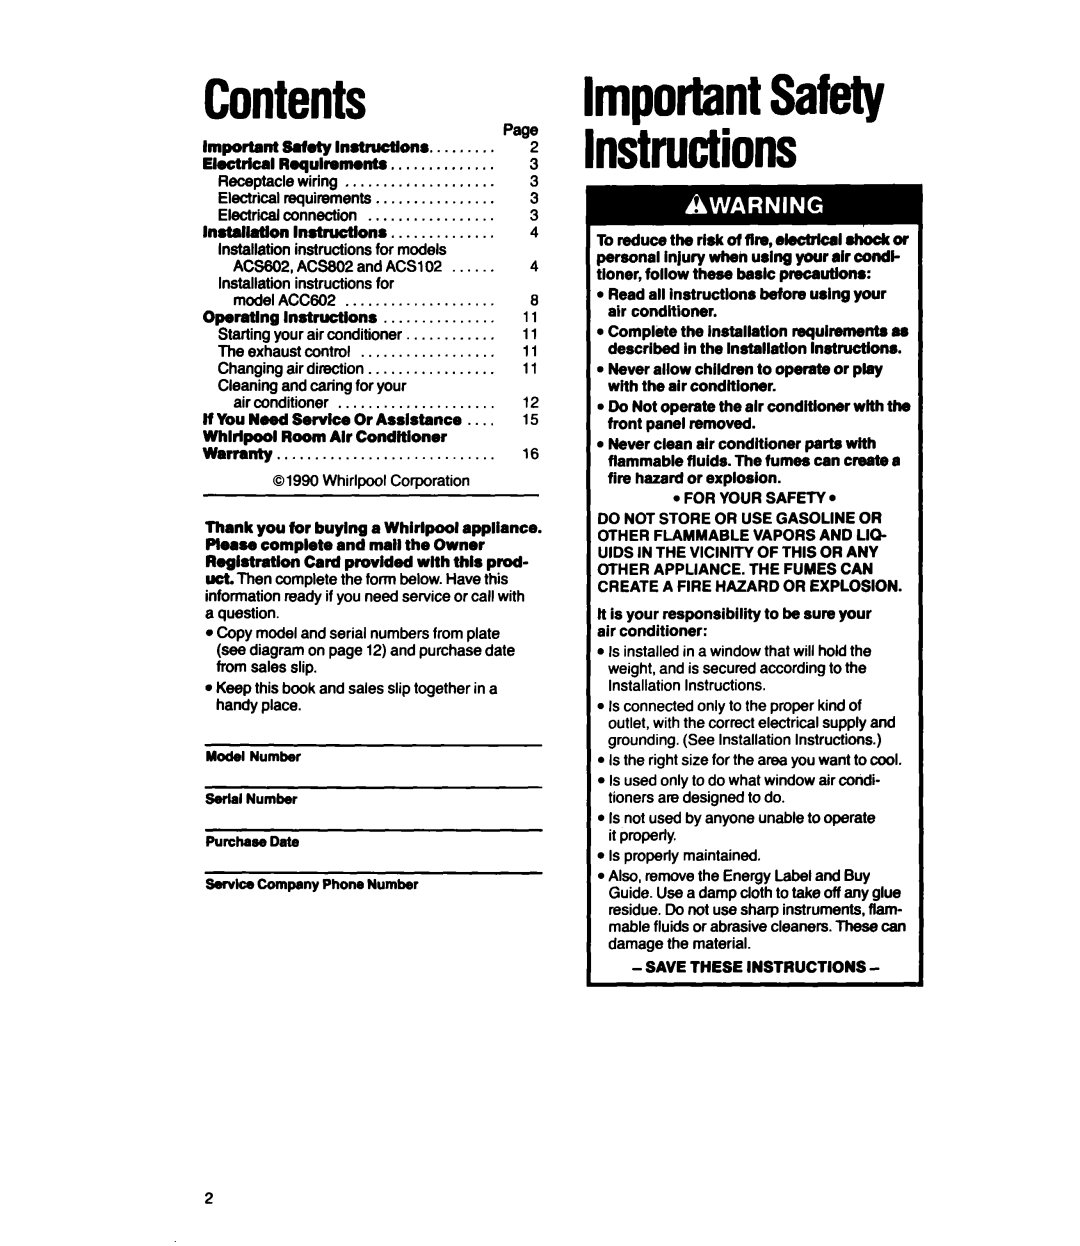 Whirlpool ACS602, ACS802, ACSLOP, ACC602 manual Contents, nstrudions, P&NmportantSafety 